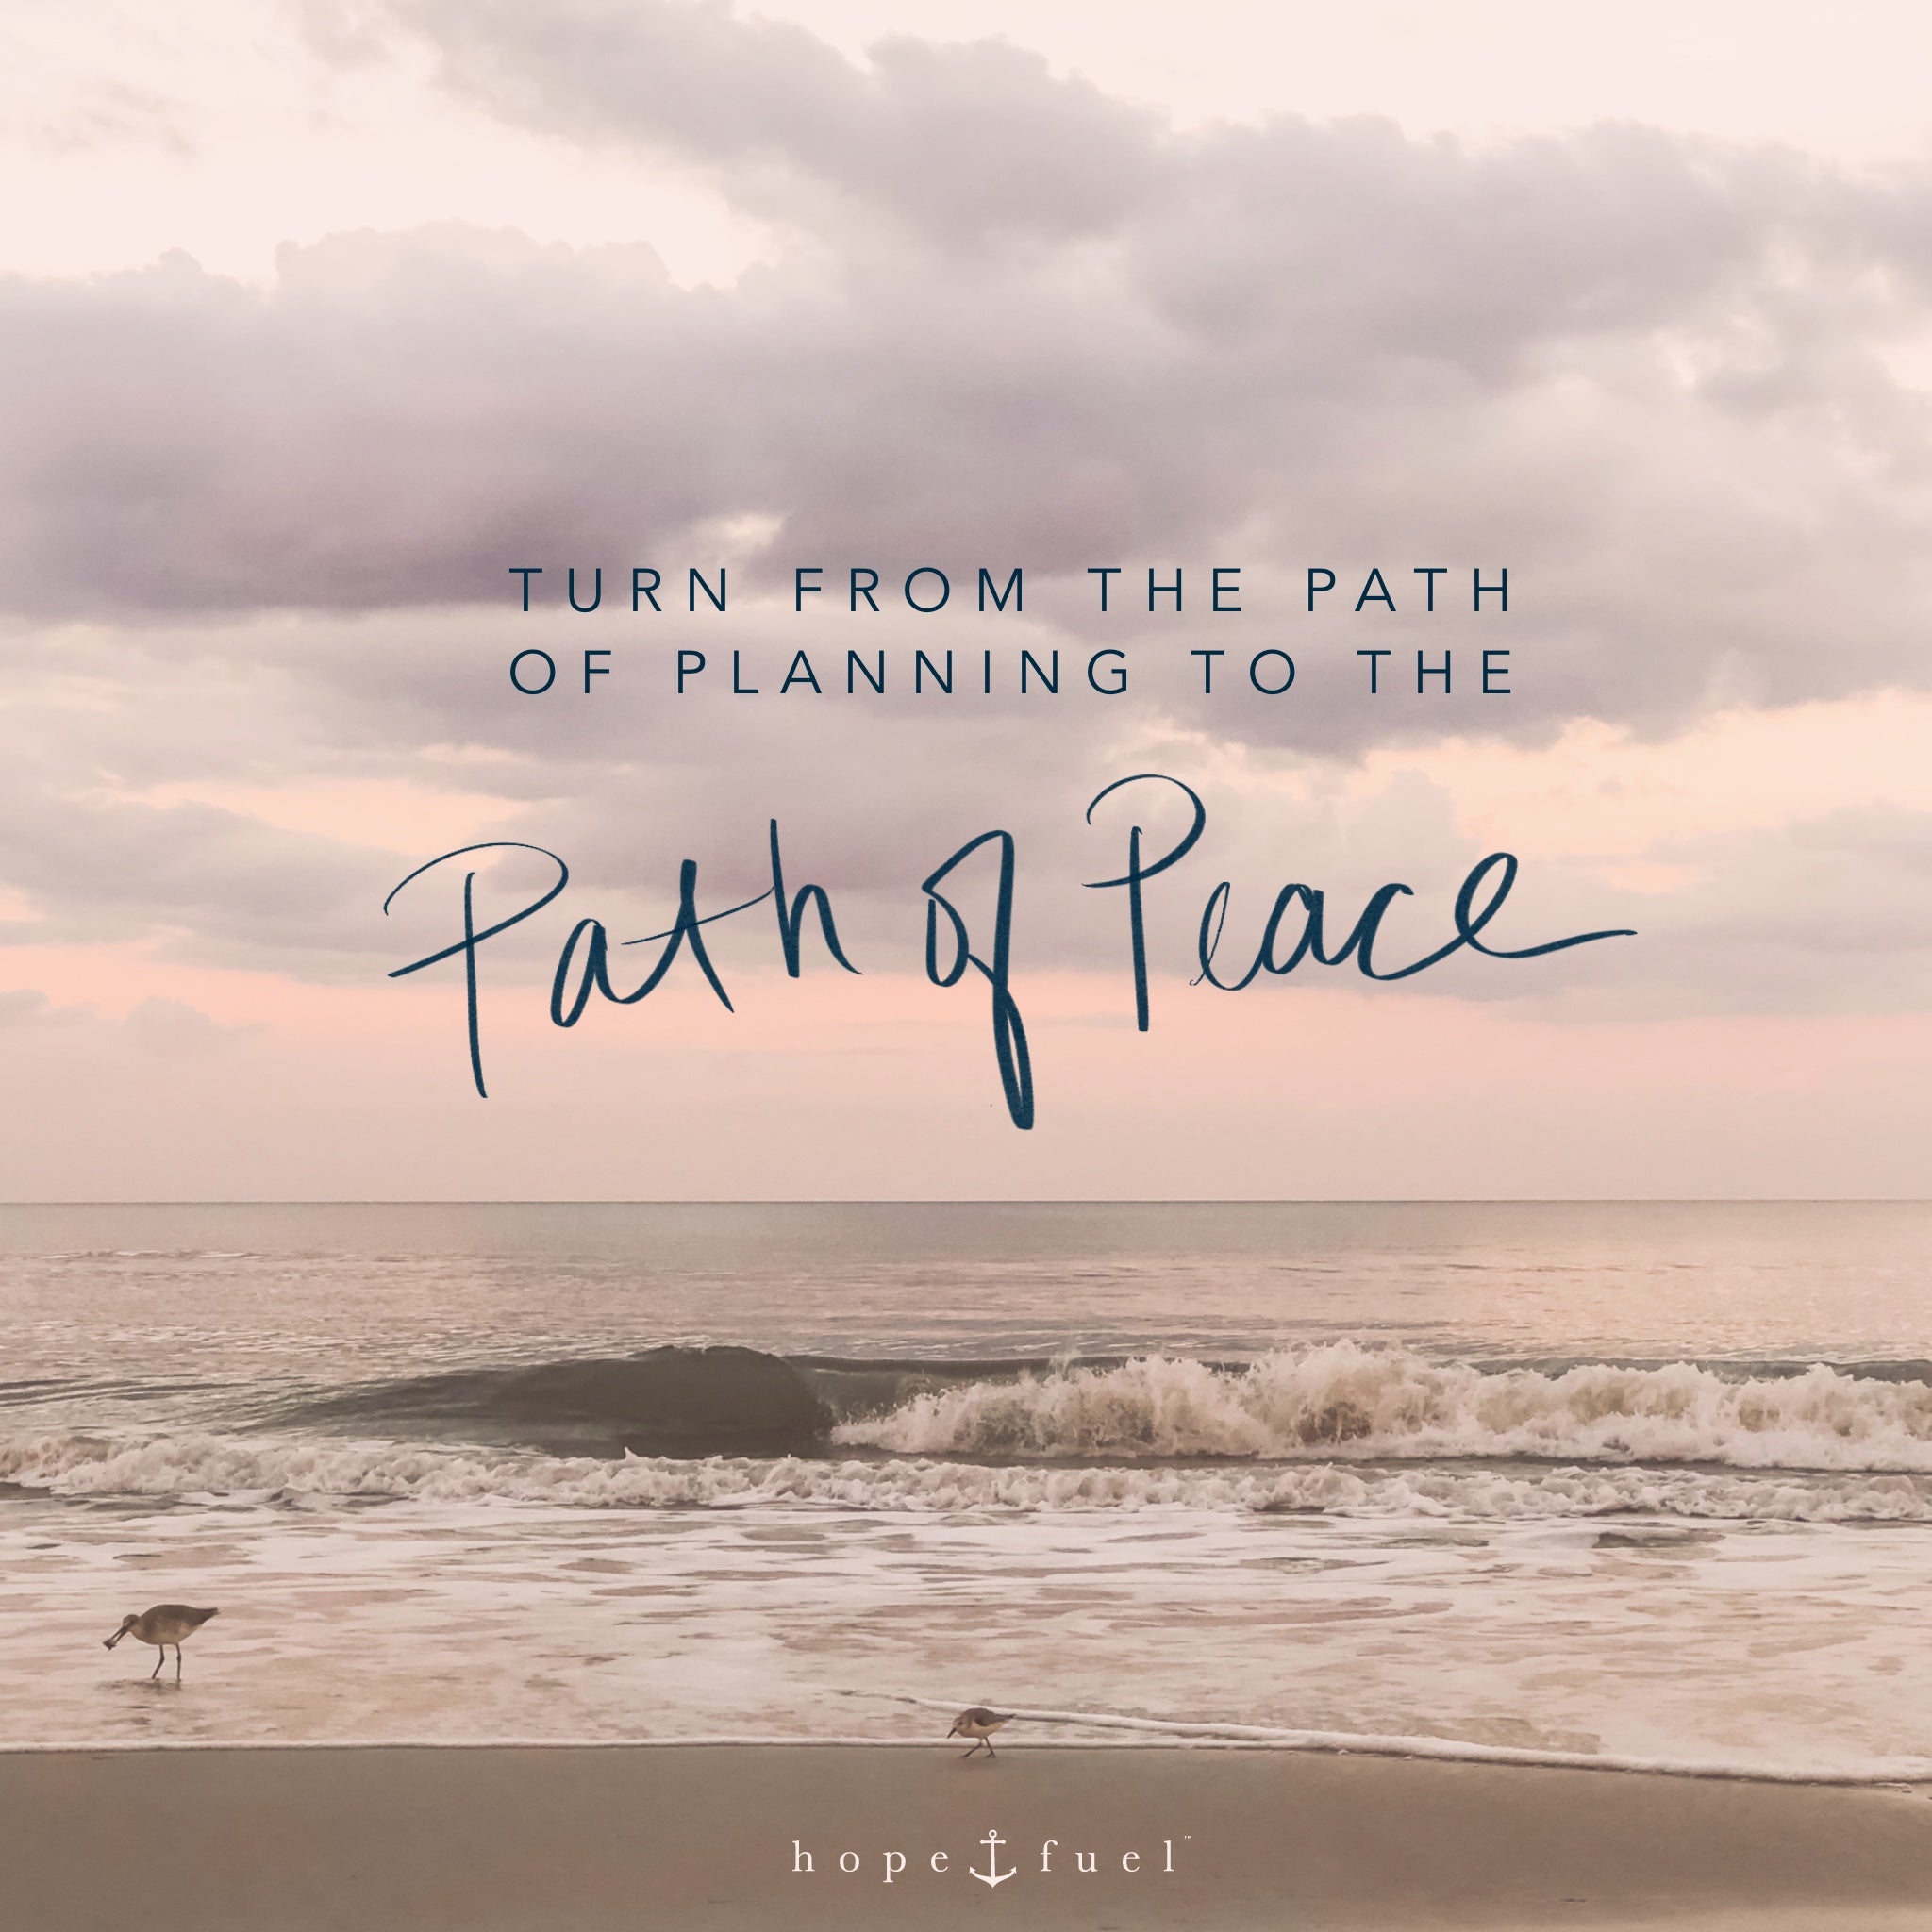 turn from the path of planning to the path of peace